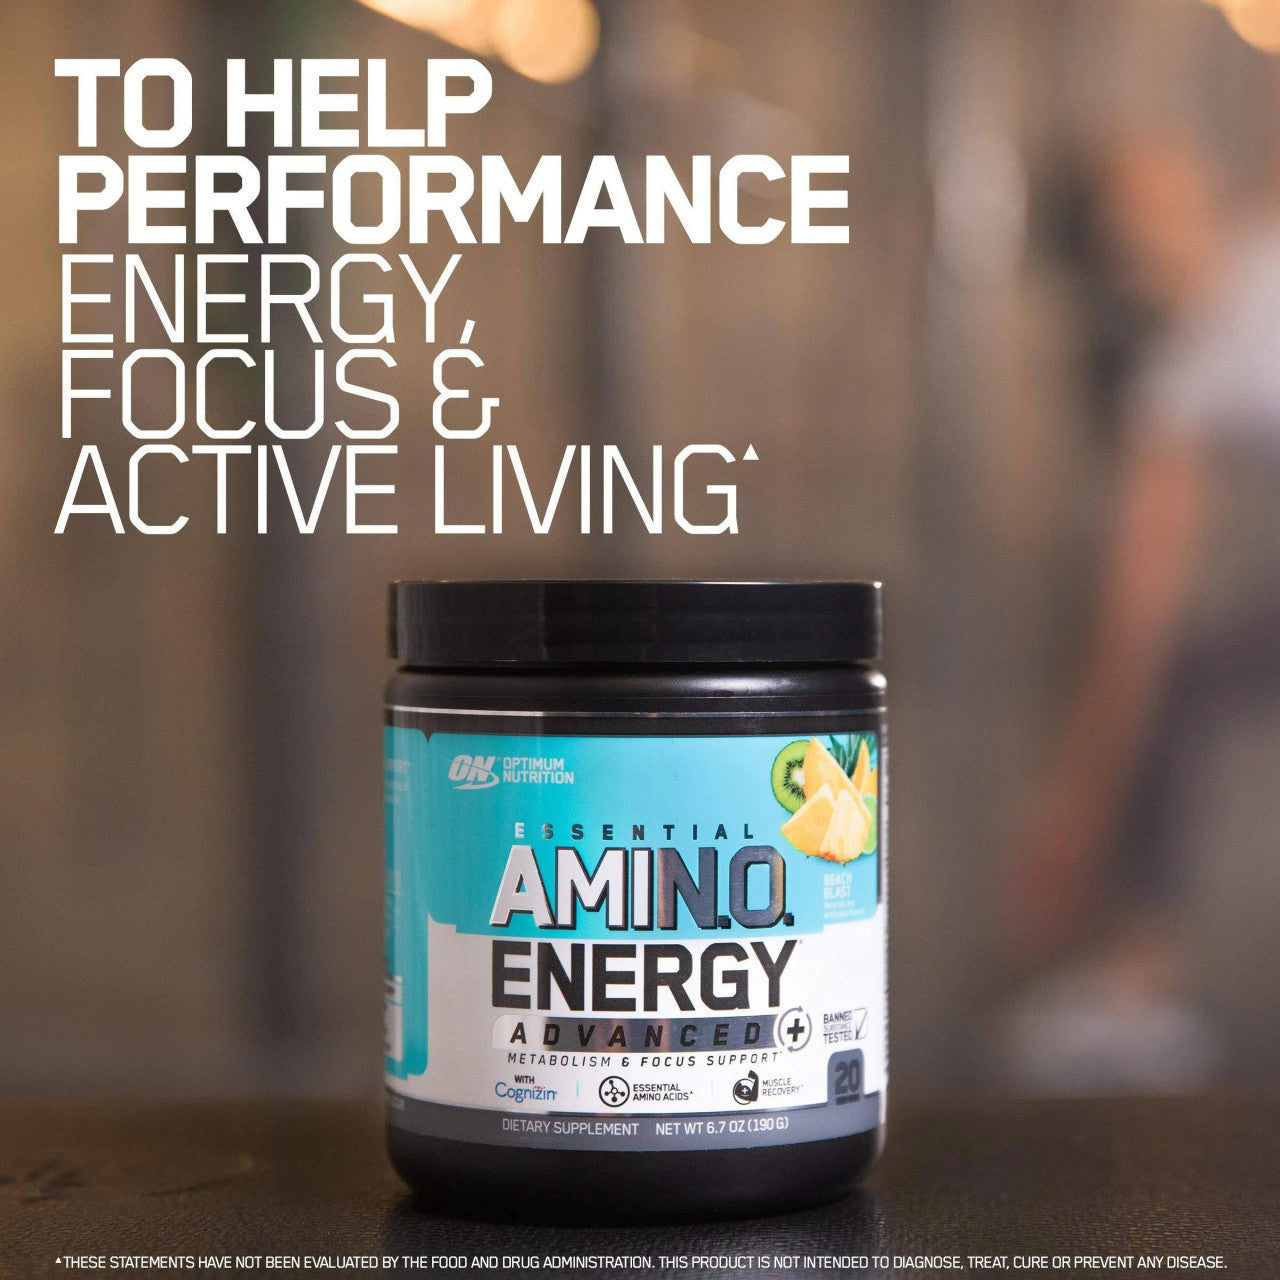 Optimum Nutrition Essential AmiN.O. Energy Advanced Product Highlights To Help Perfomance